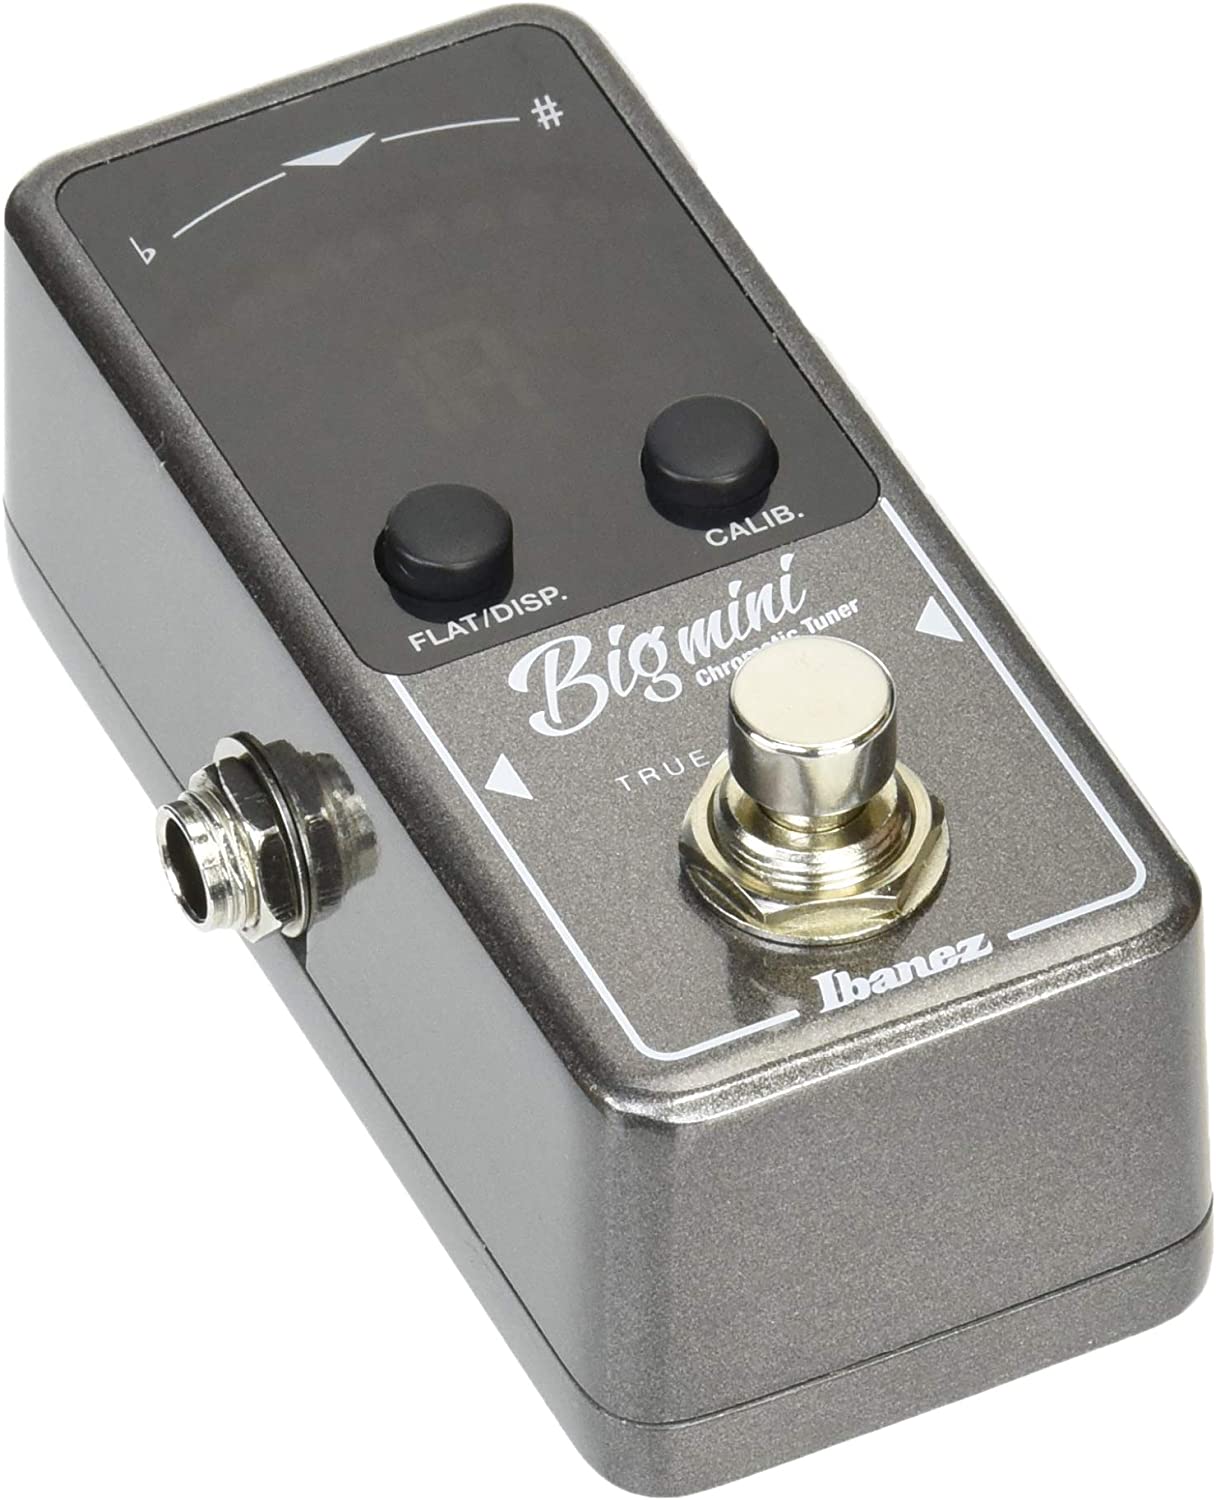 Ibanez Chromatic Guitar/Bass Tuner Pedal  on a white background